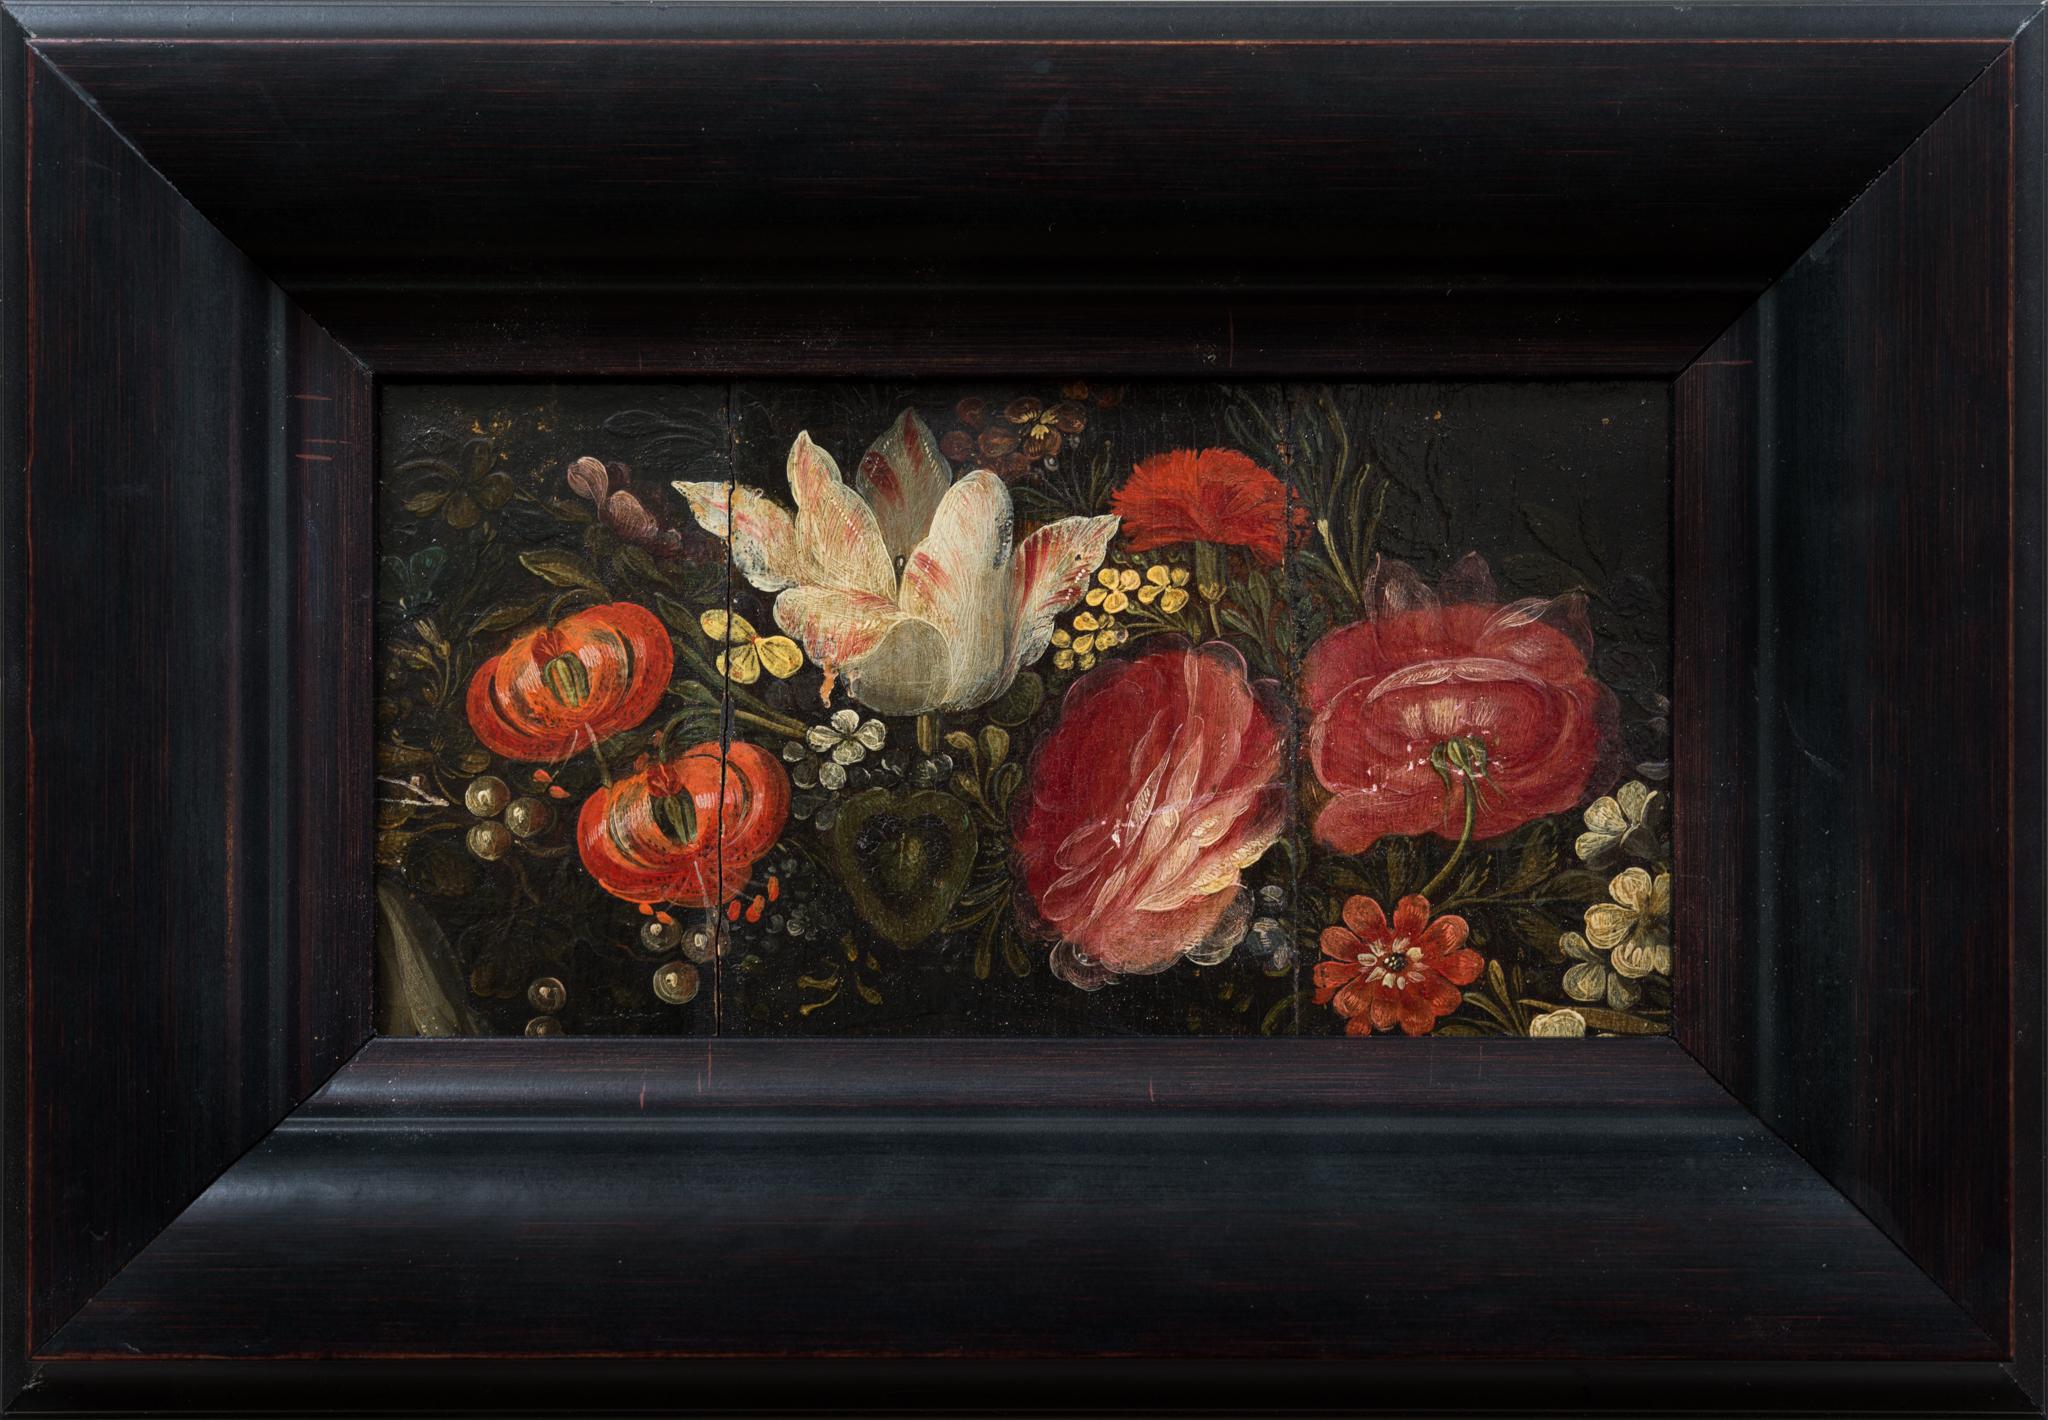 This exquisite floral still life, likely created in the late 17th century, is attributed to a follower of Daniel Seghers. The painting showcases a vivid arrangement of various flowers, including white tulips, red roses, and bright poppies?, all set